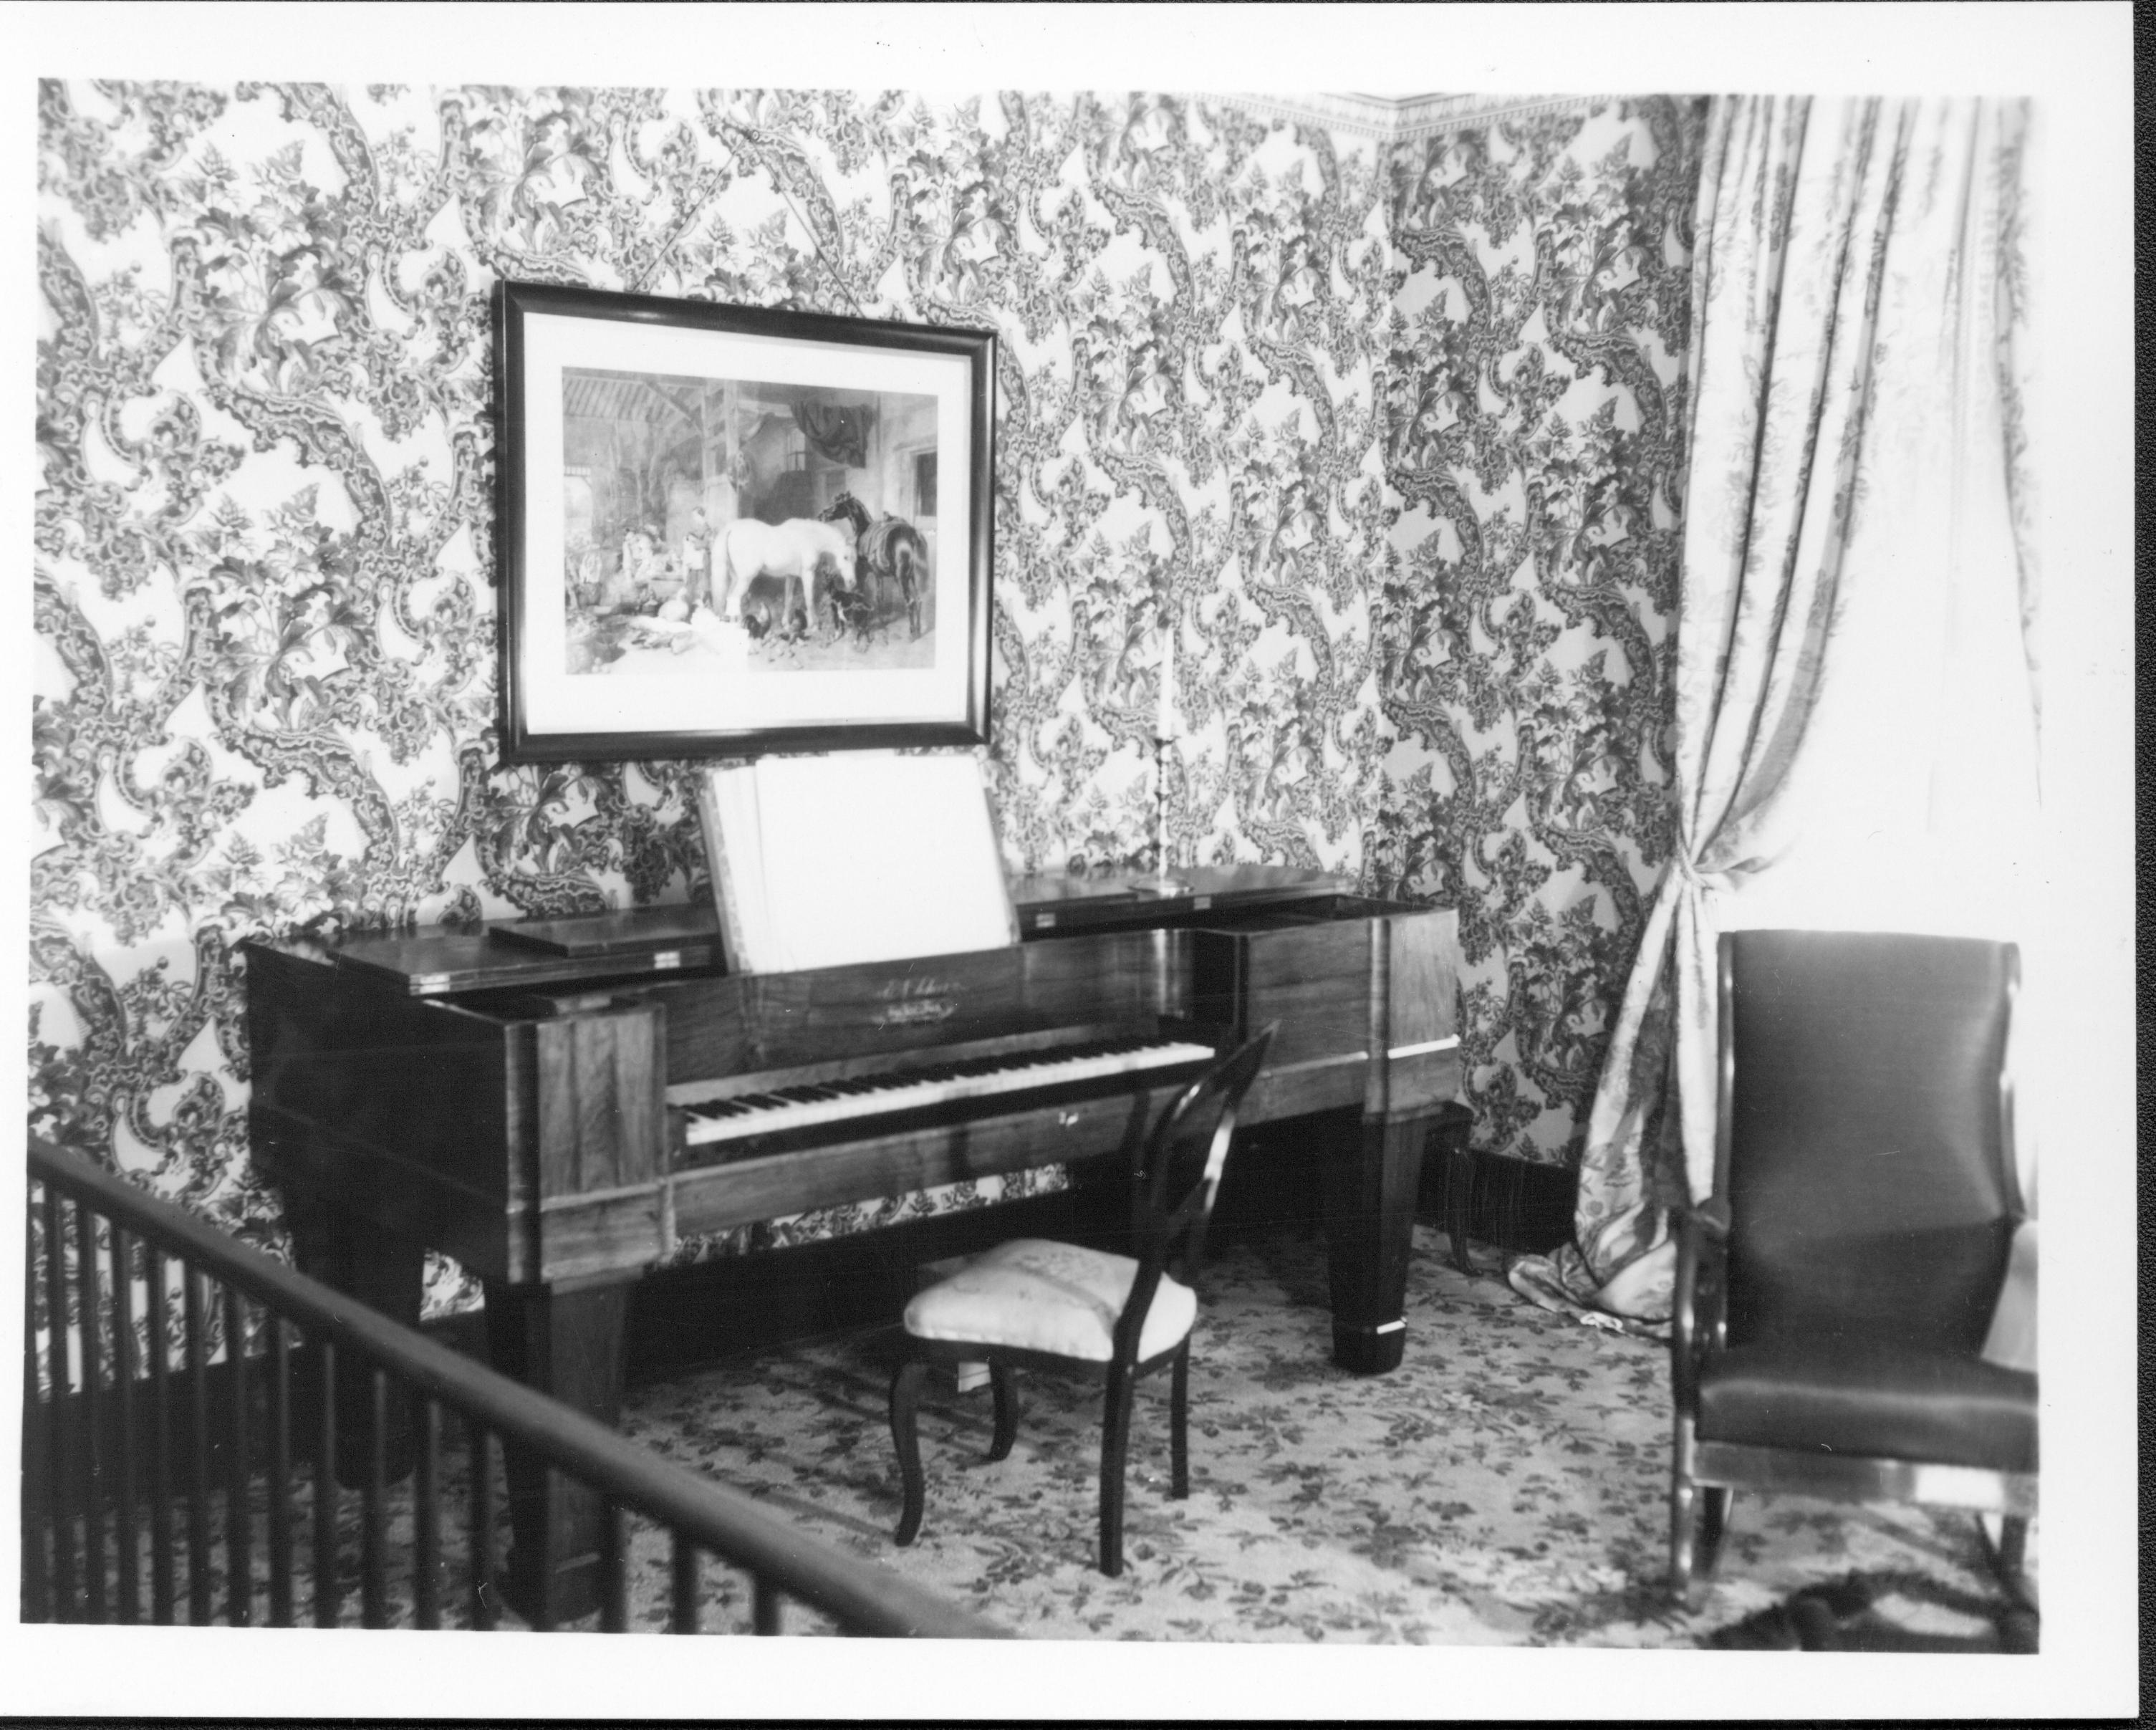 NA class 1, picture 76 Lincoln Home, Sitting Room, piano, picture